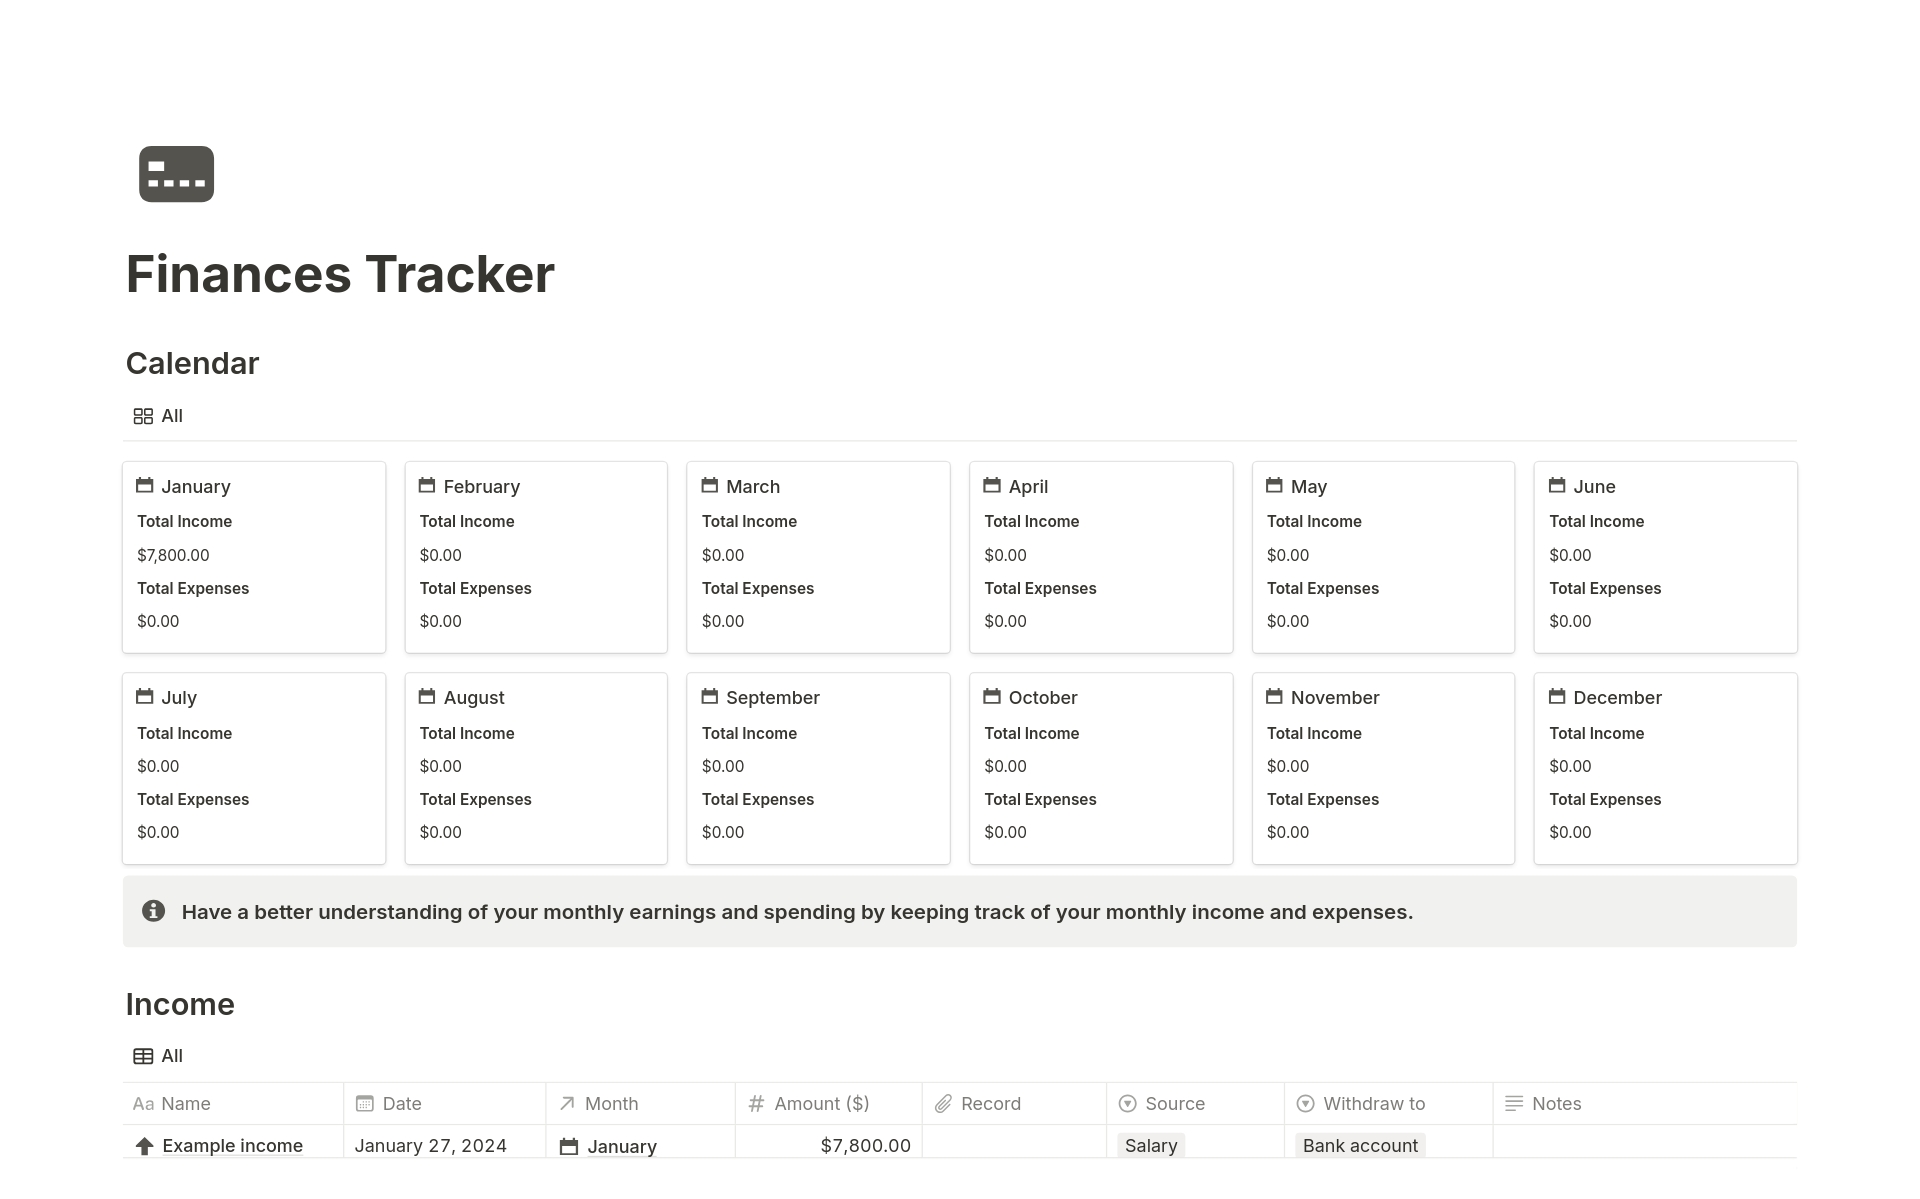 Understand your finances better with Notion Finances Tracker.
